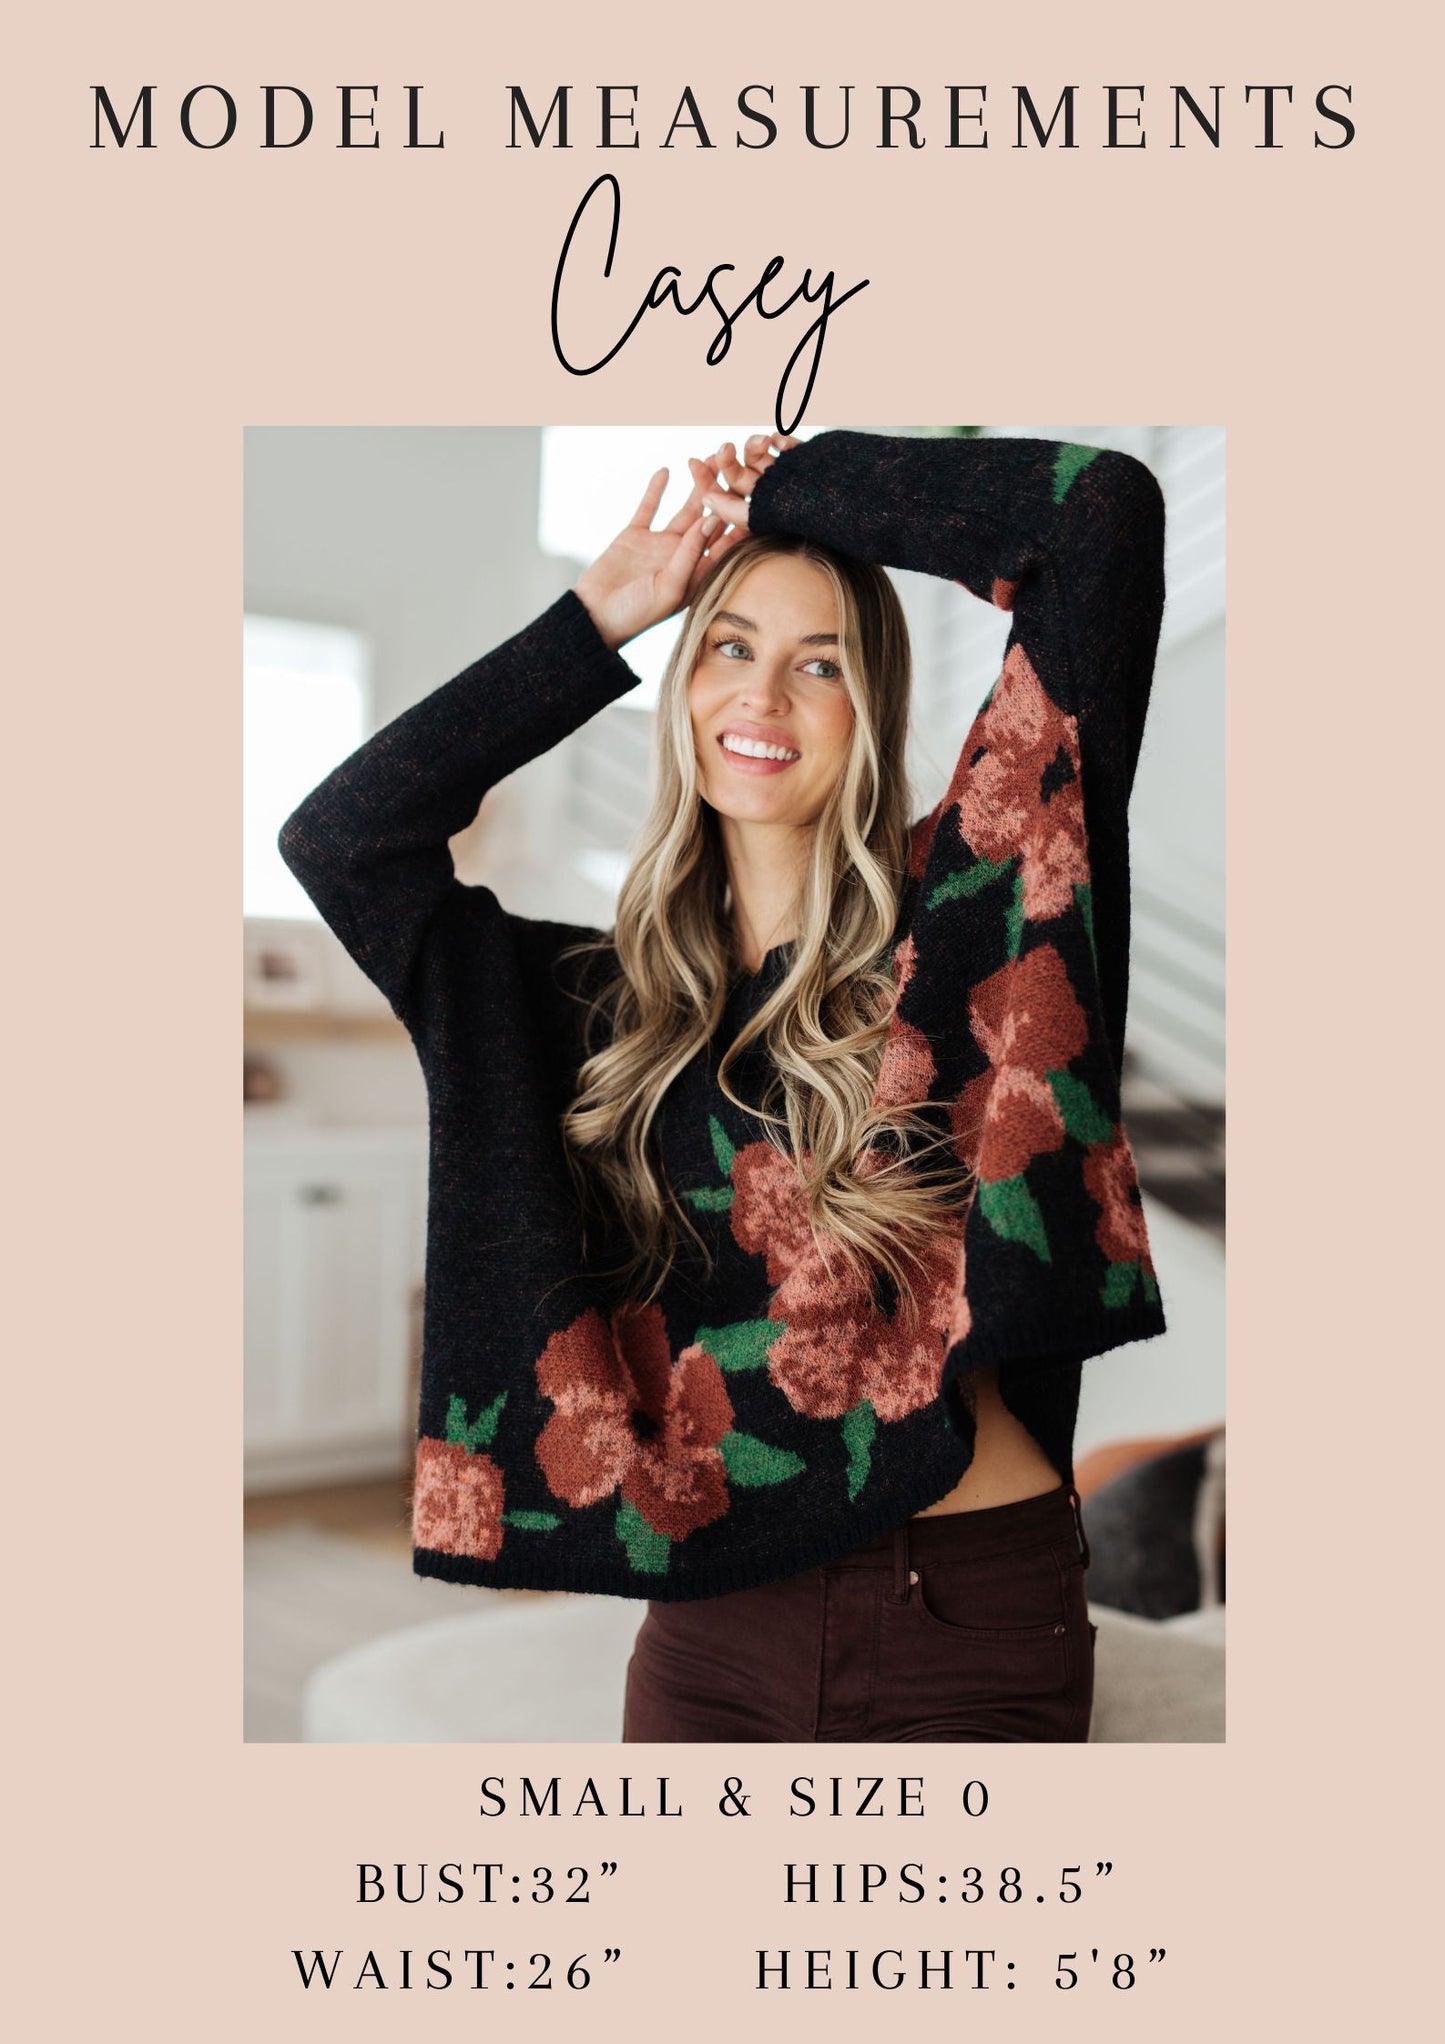 The Happiest Flowers Floral Sweater